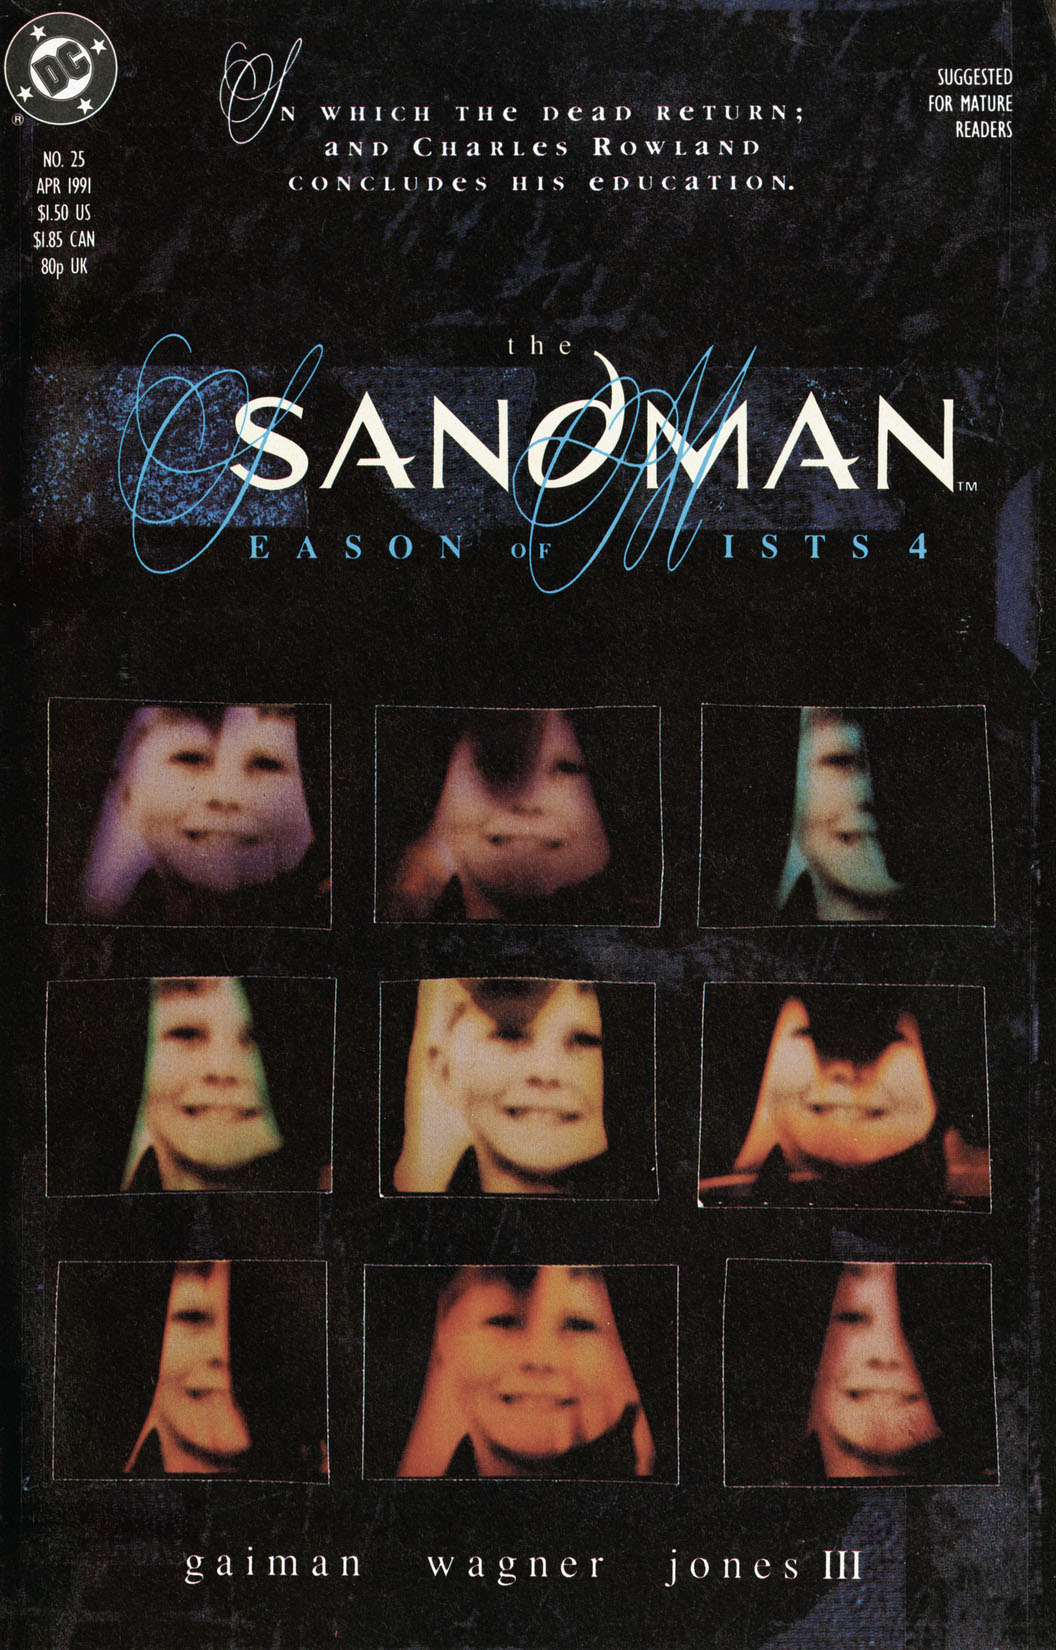 The Sandman #25 preview images